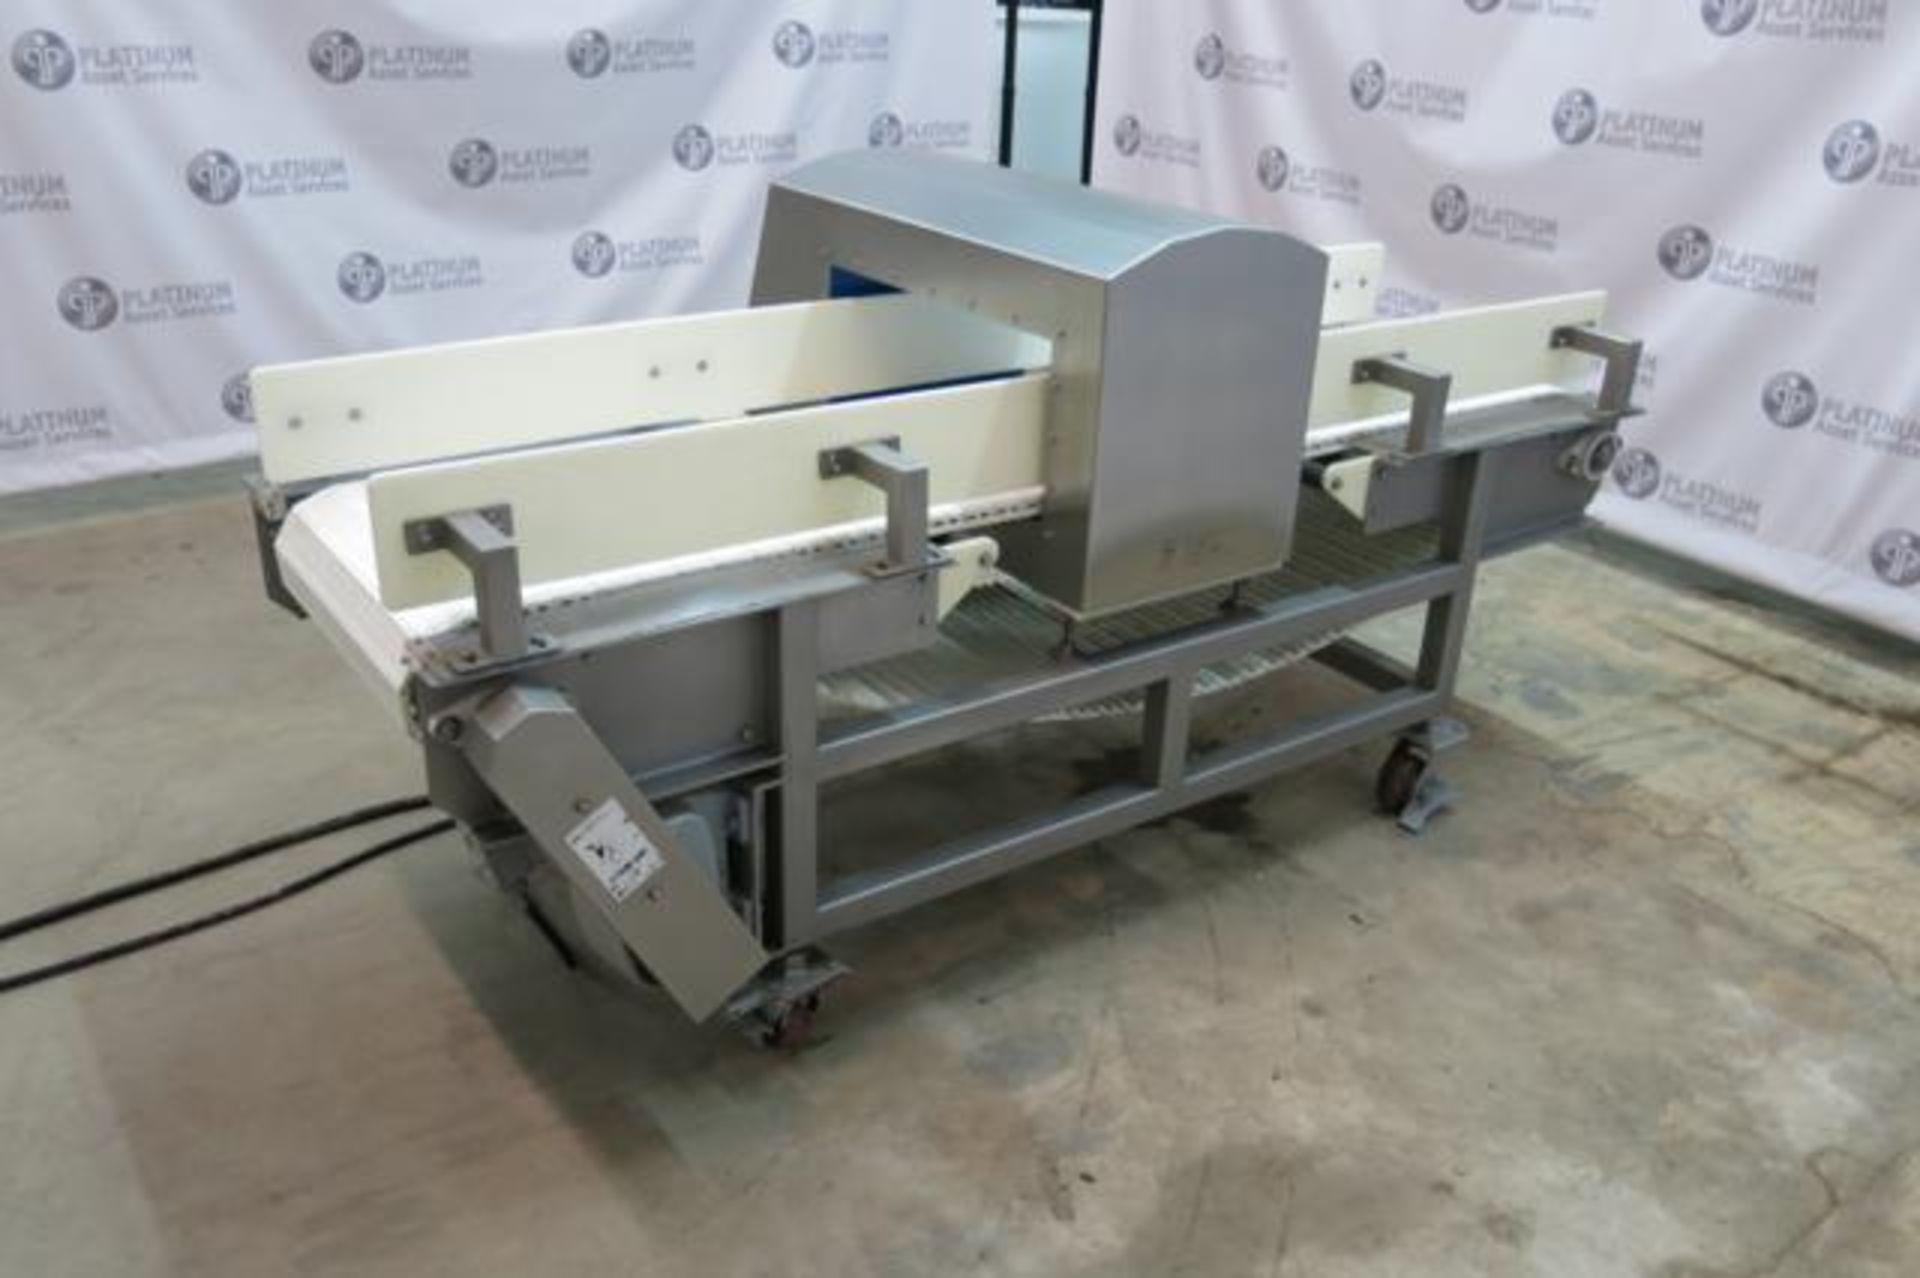 LOMA, IQ3+E, STAINLESS STEEL, METAL DETECTOR WITH CONVEYOR, 2016, S/N QEU55-25-35054D - Image 7 of 13